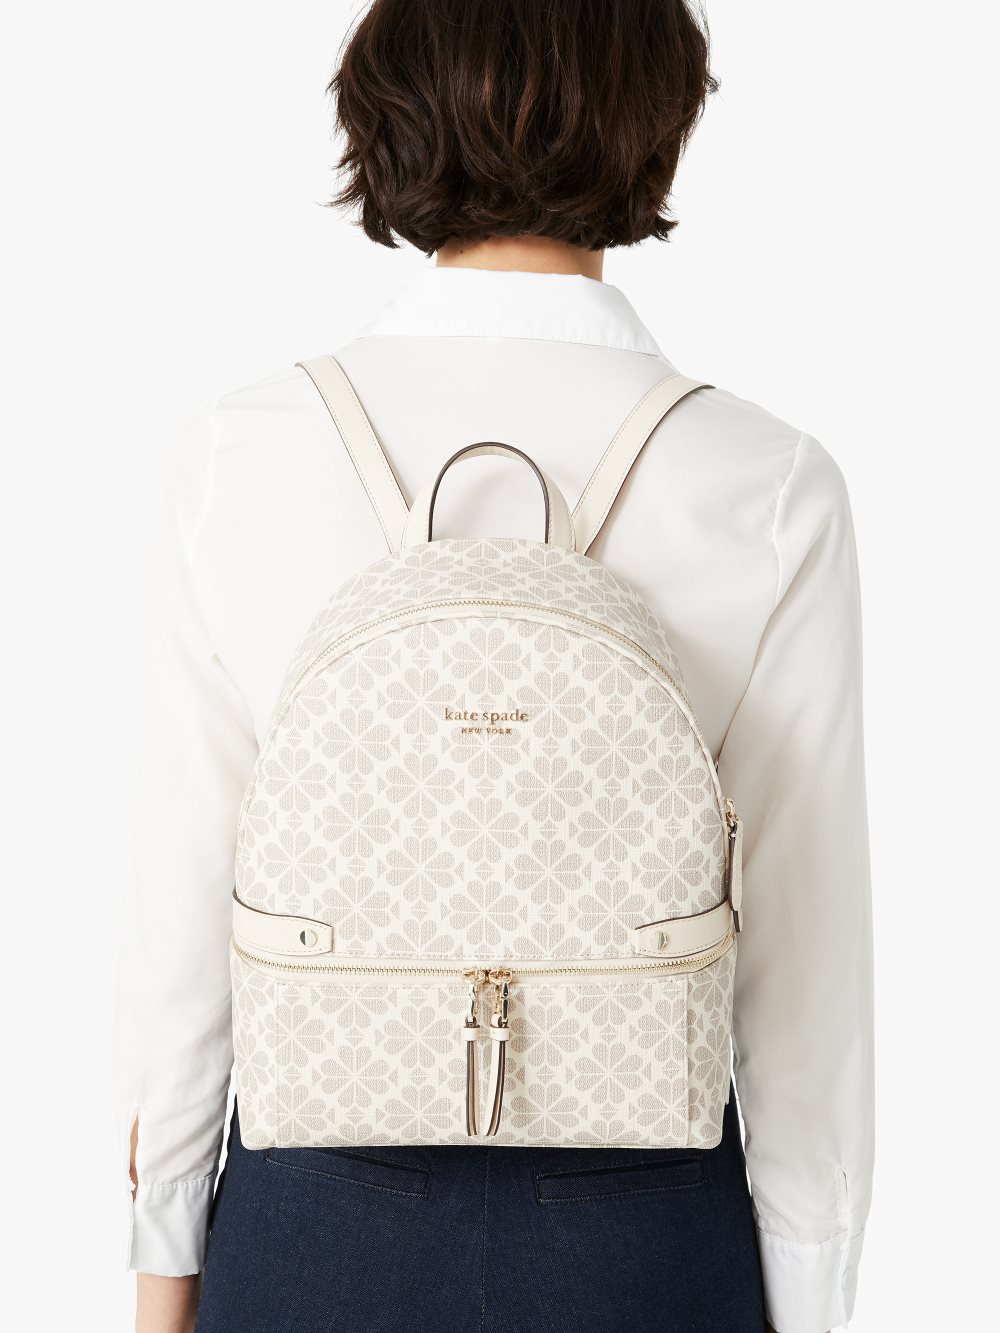 Women's parchment multi spade flower coated canvas day pack medium backpack | Kate Spade